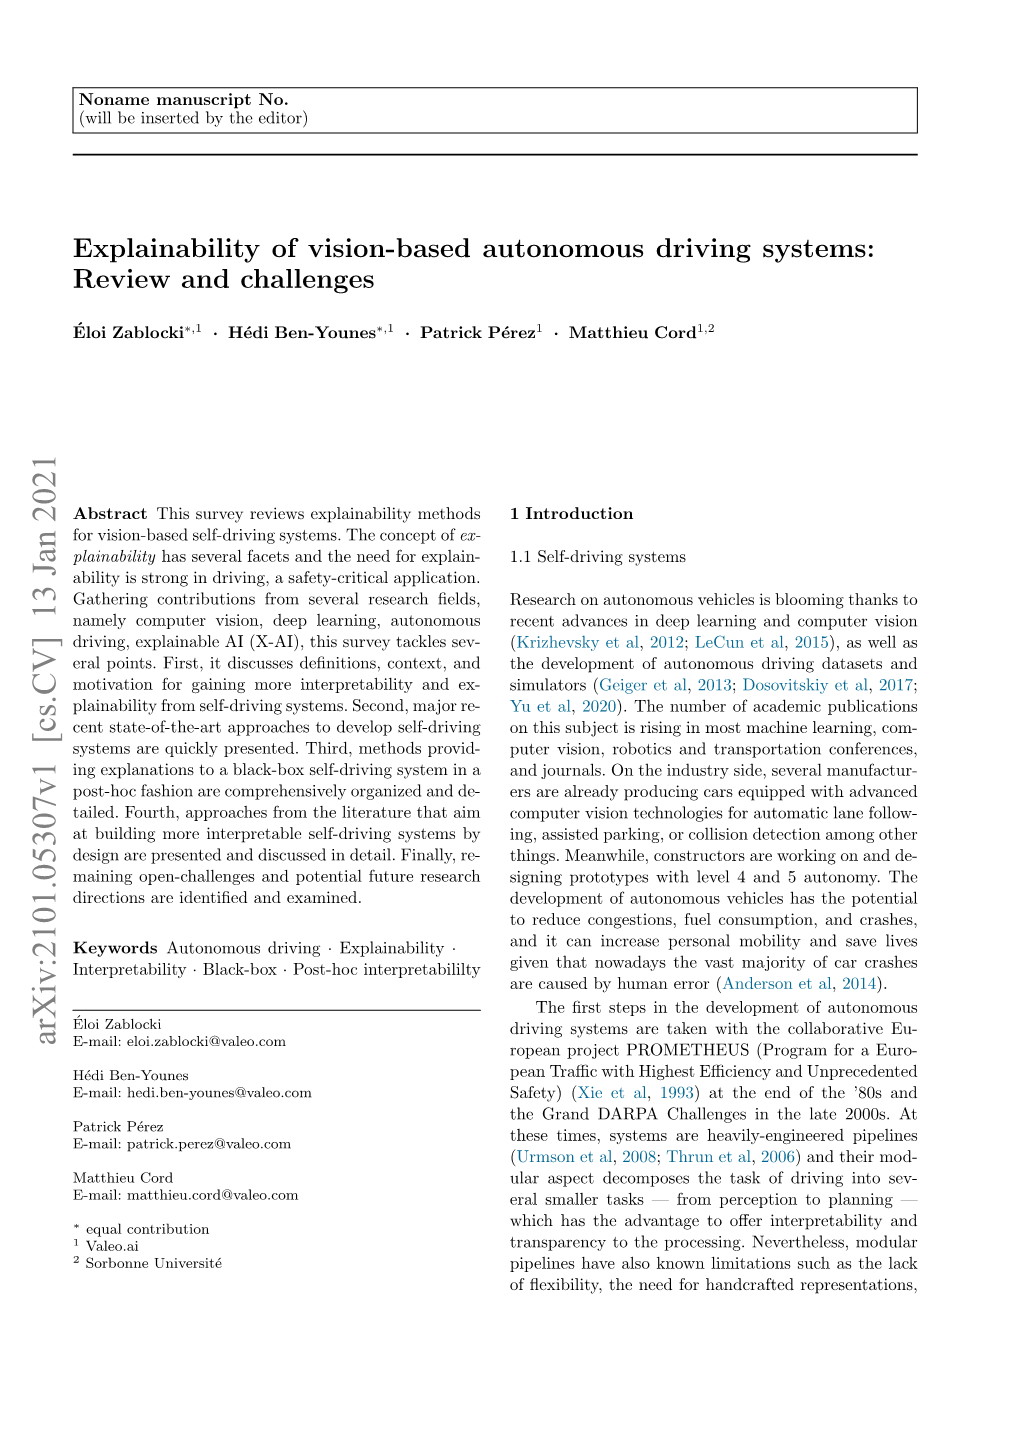 Explainability of Vision-Based Autonomous Driving Systems: Review and Challenges